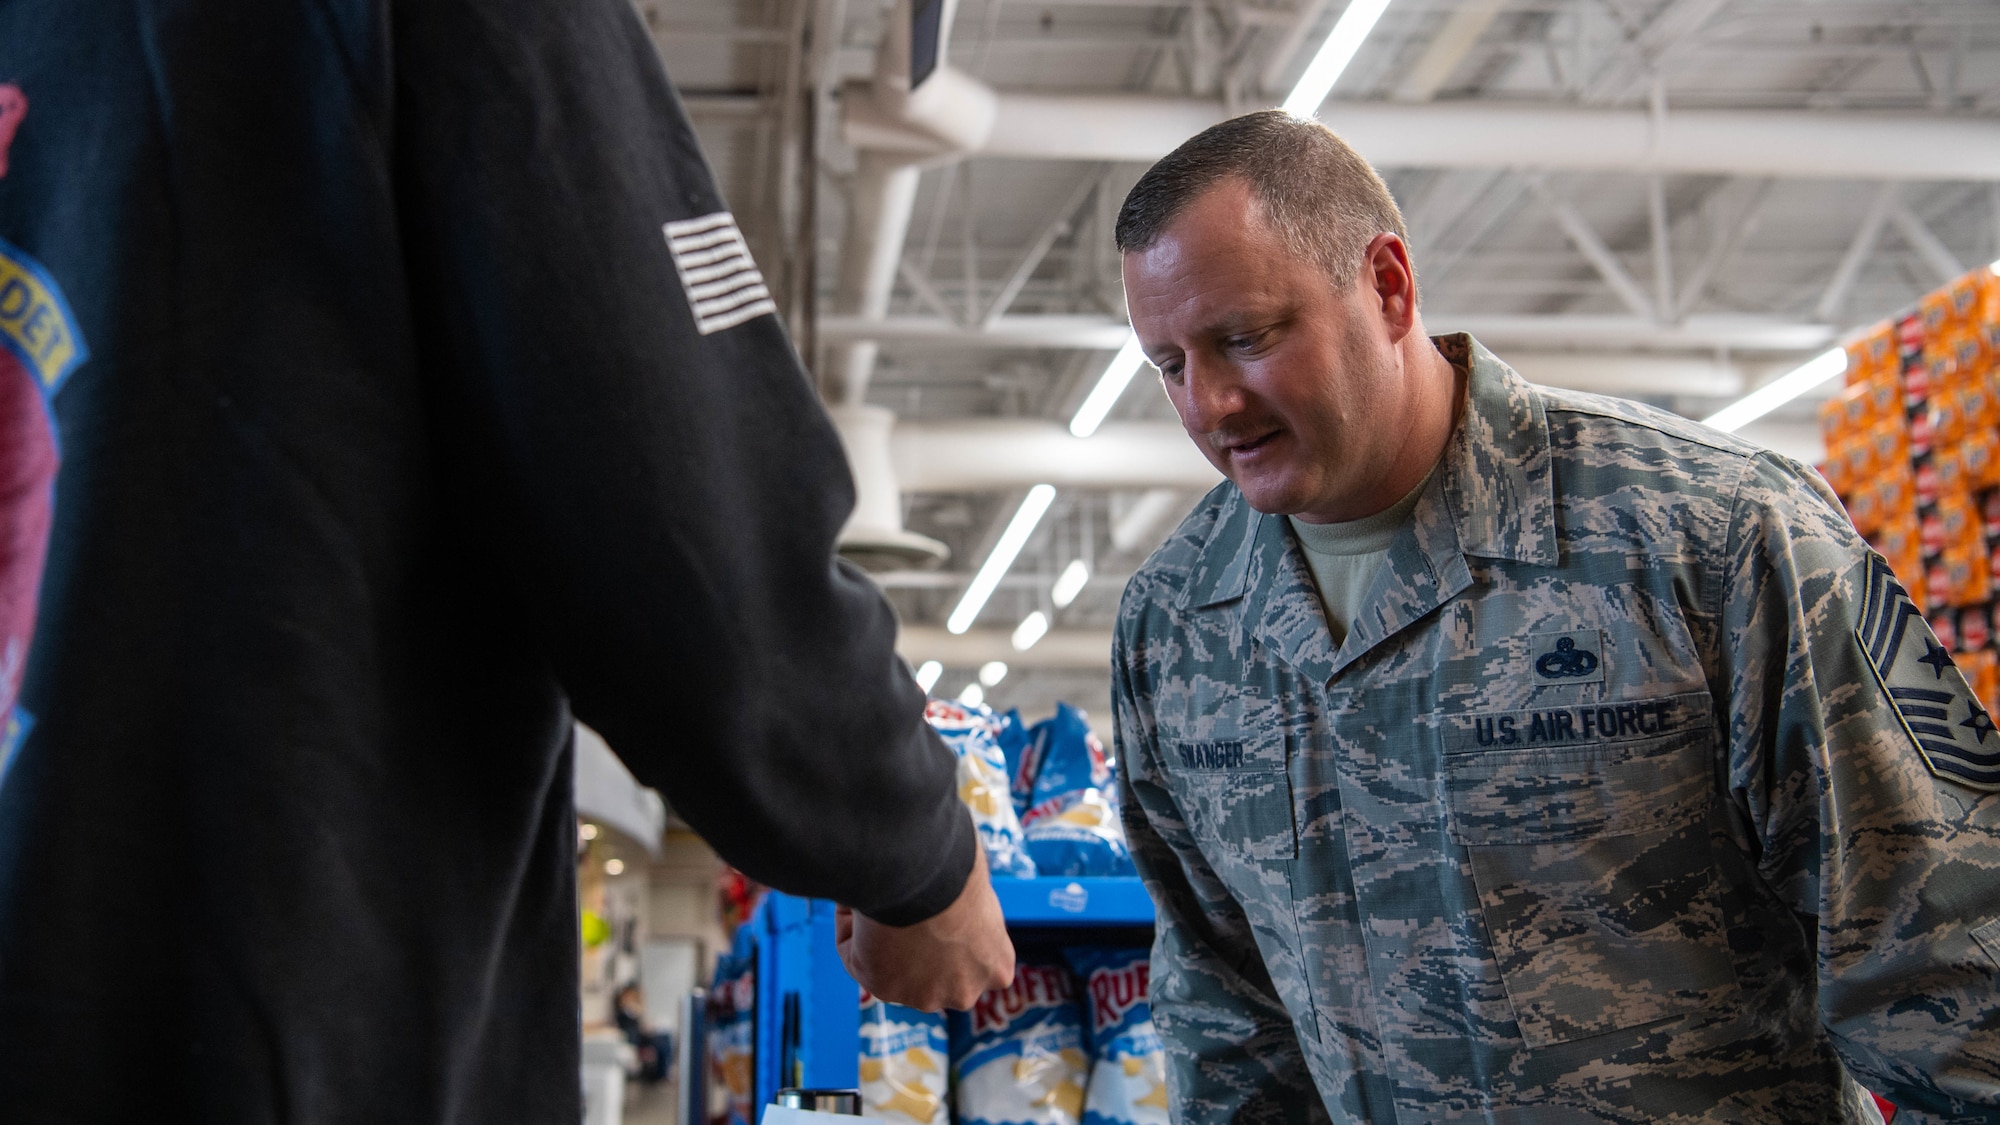 Chief Master Sgt. Joshua Swanger, 2nd Bomb Wing command chief, checks an identification card at the commissary at Barksdale Air Force Base, La., March 21, 2020. To mitigate the influx of shoppers and to keep Airmen and their families safe, Barksdale’s commissary began checking identification cards at the front doors, to ensure only authorized personnel were accessing the store. (U.S. Air Force photo by Airman 1st Class Jacob B. Wrightsman)